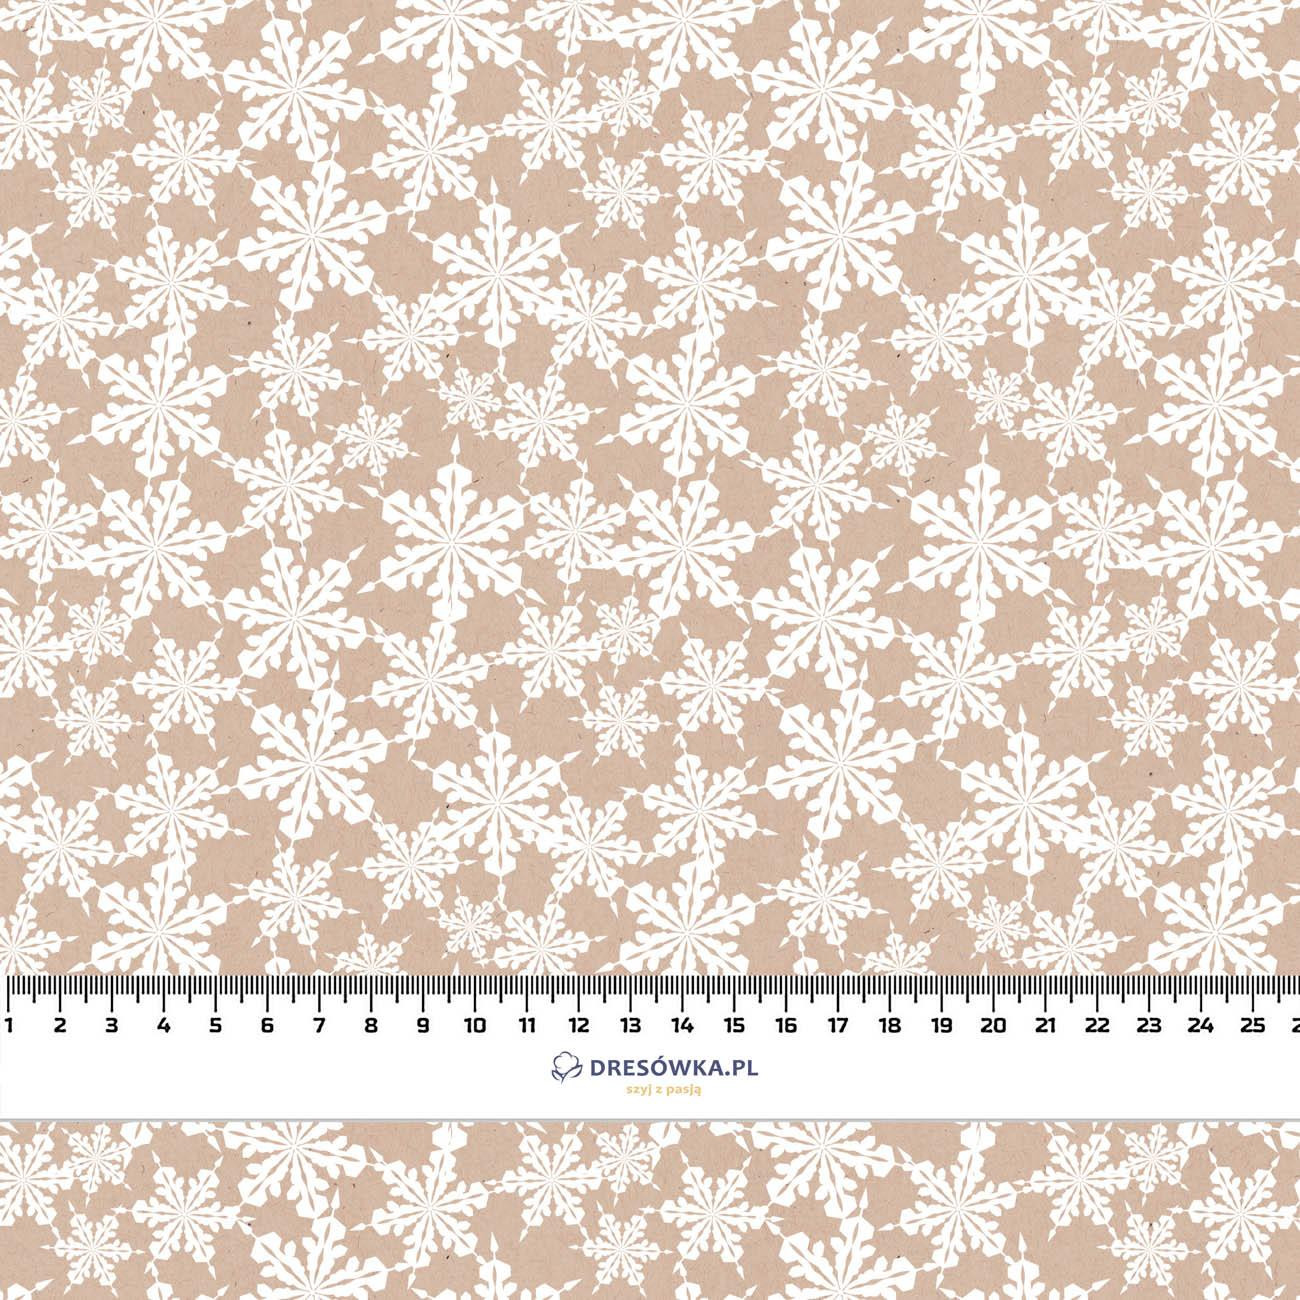 PAPER SNOWFLAKES (WHITE CHRISTMAS) - Waterproof woven fabric